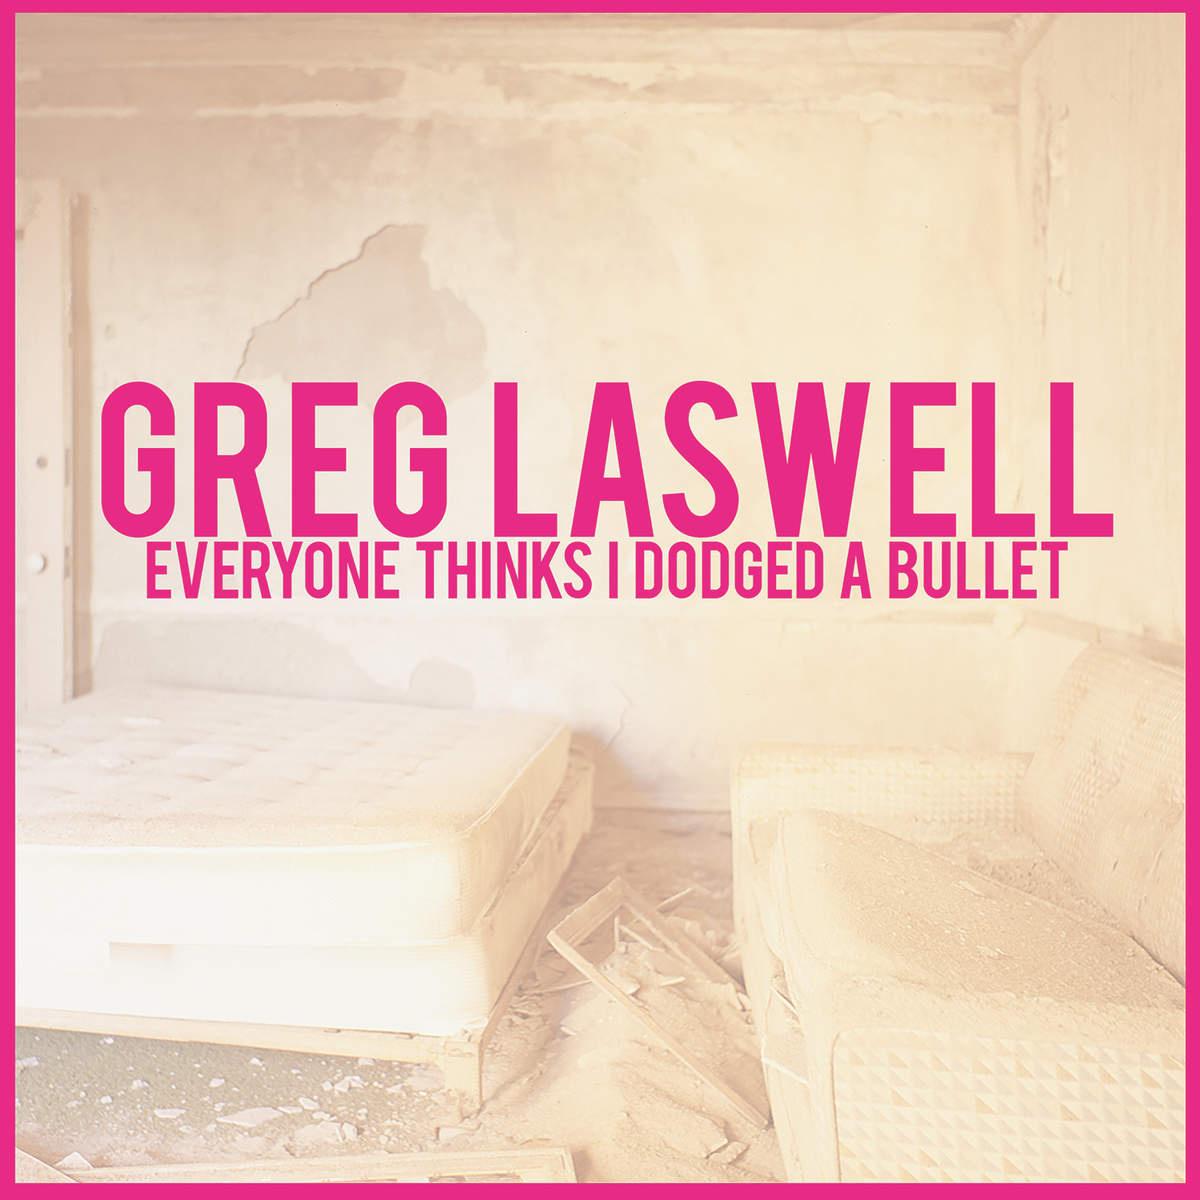 Greg Laswell - Dodged a Bullet (Guitar Version)